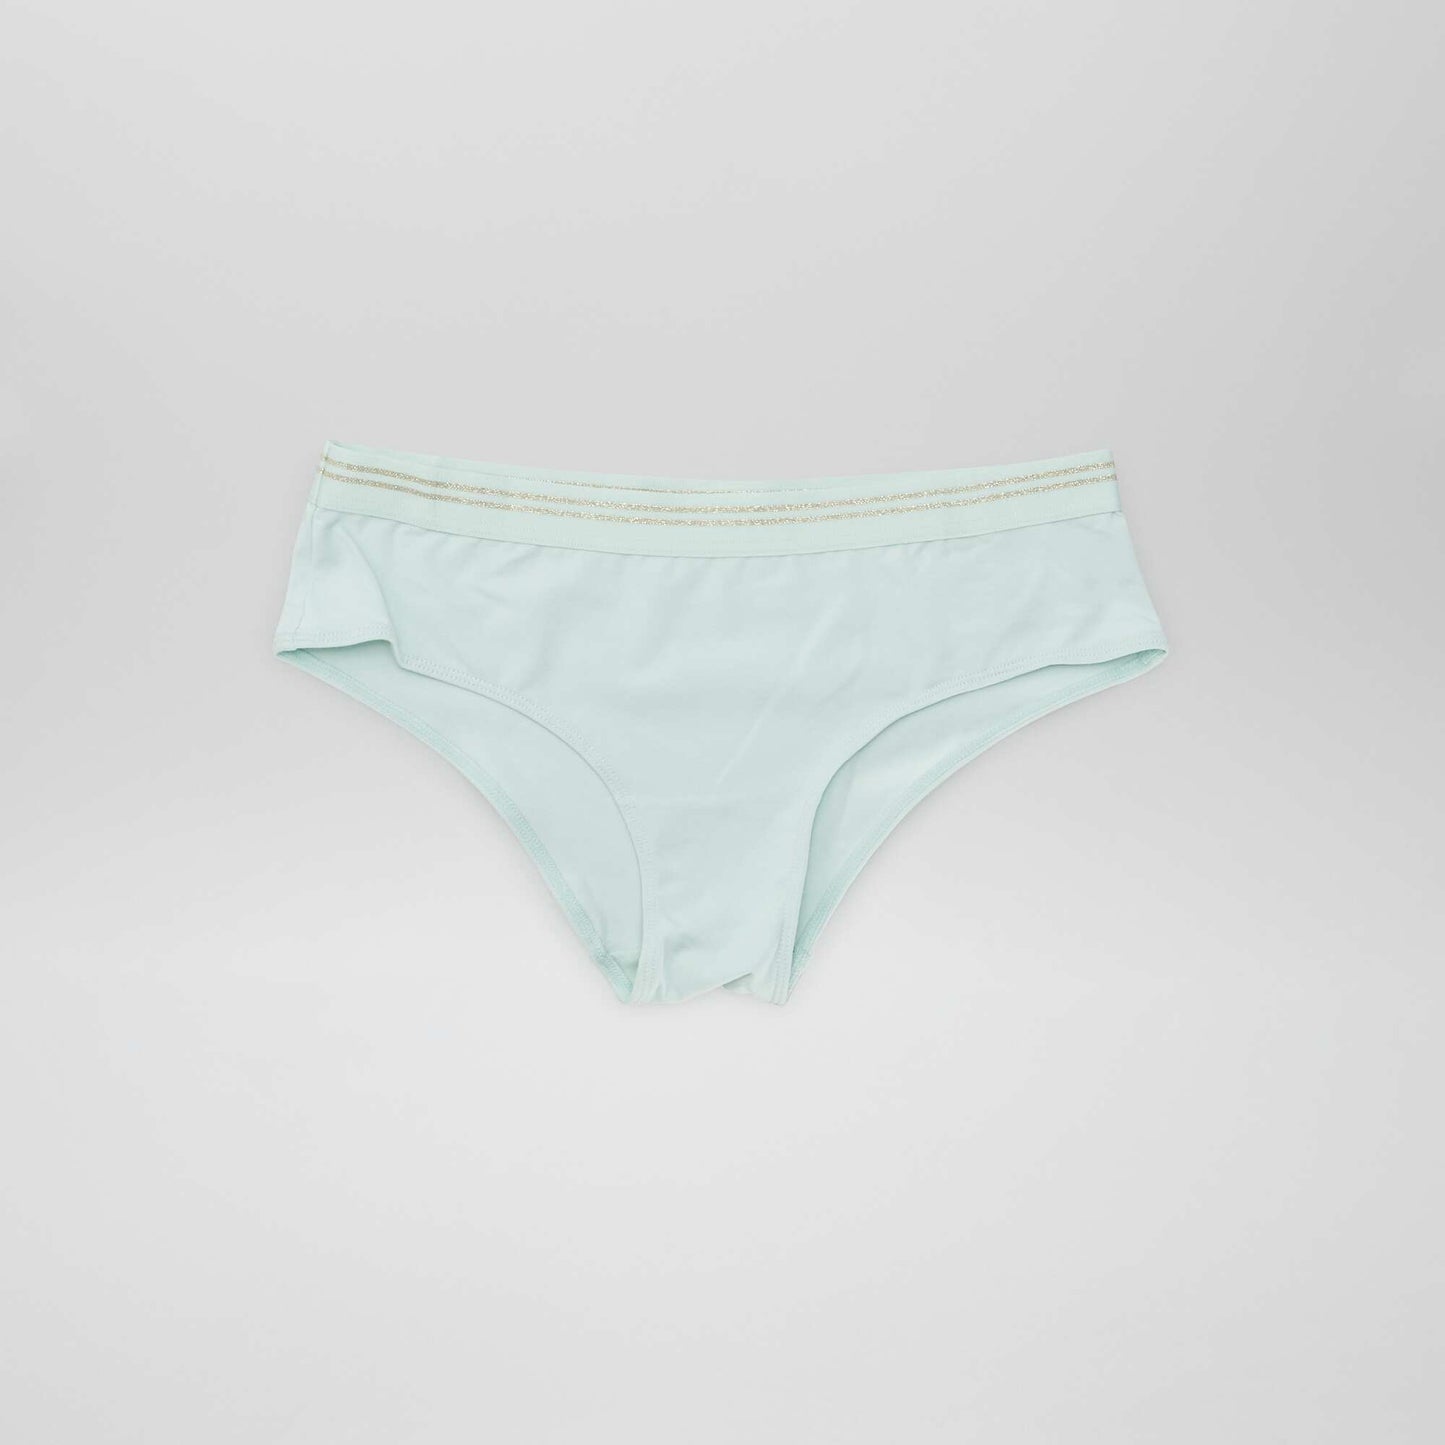 Pack of 2 cotton boy shorts white